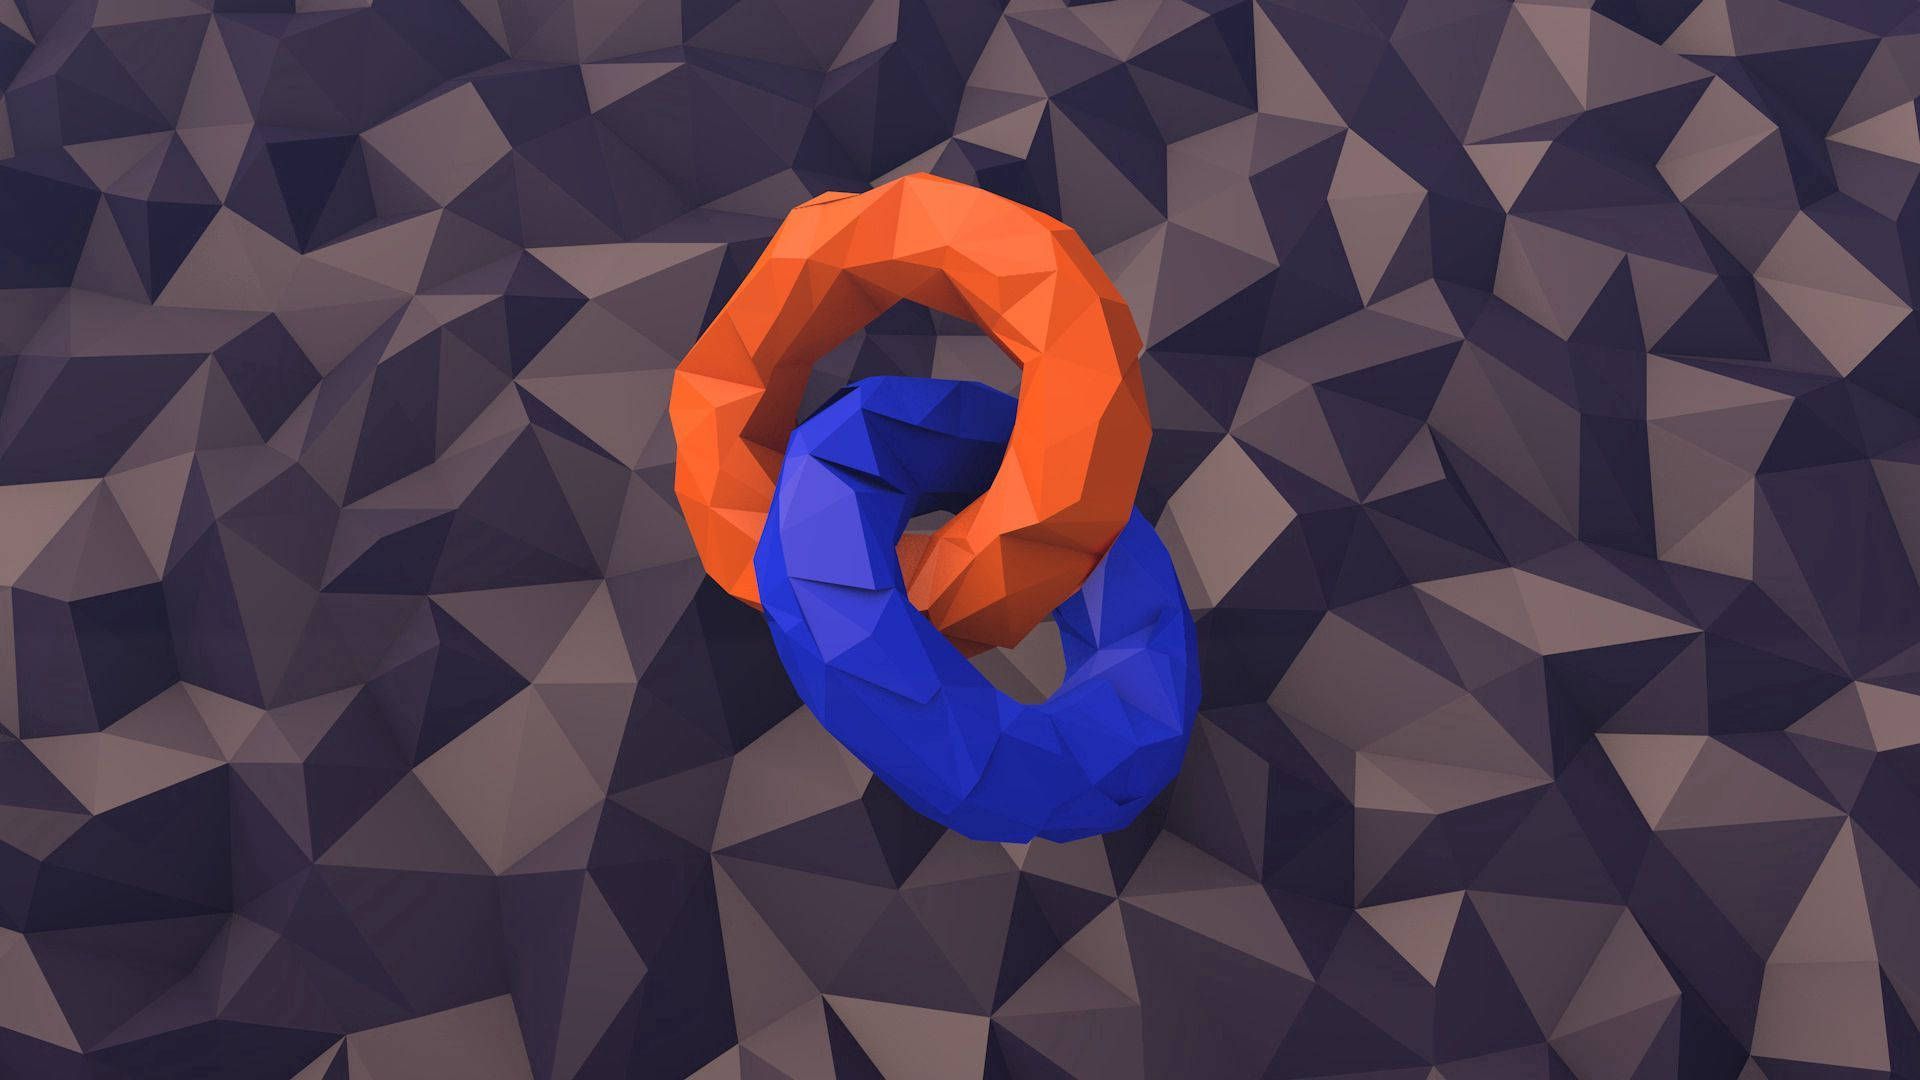 Free Low Poly Wallpaper Downloads, Low Poly Wallpaper for FREE